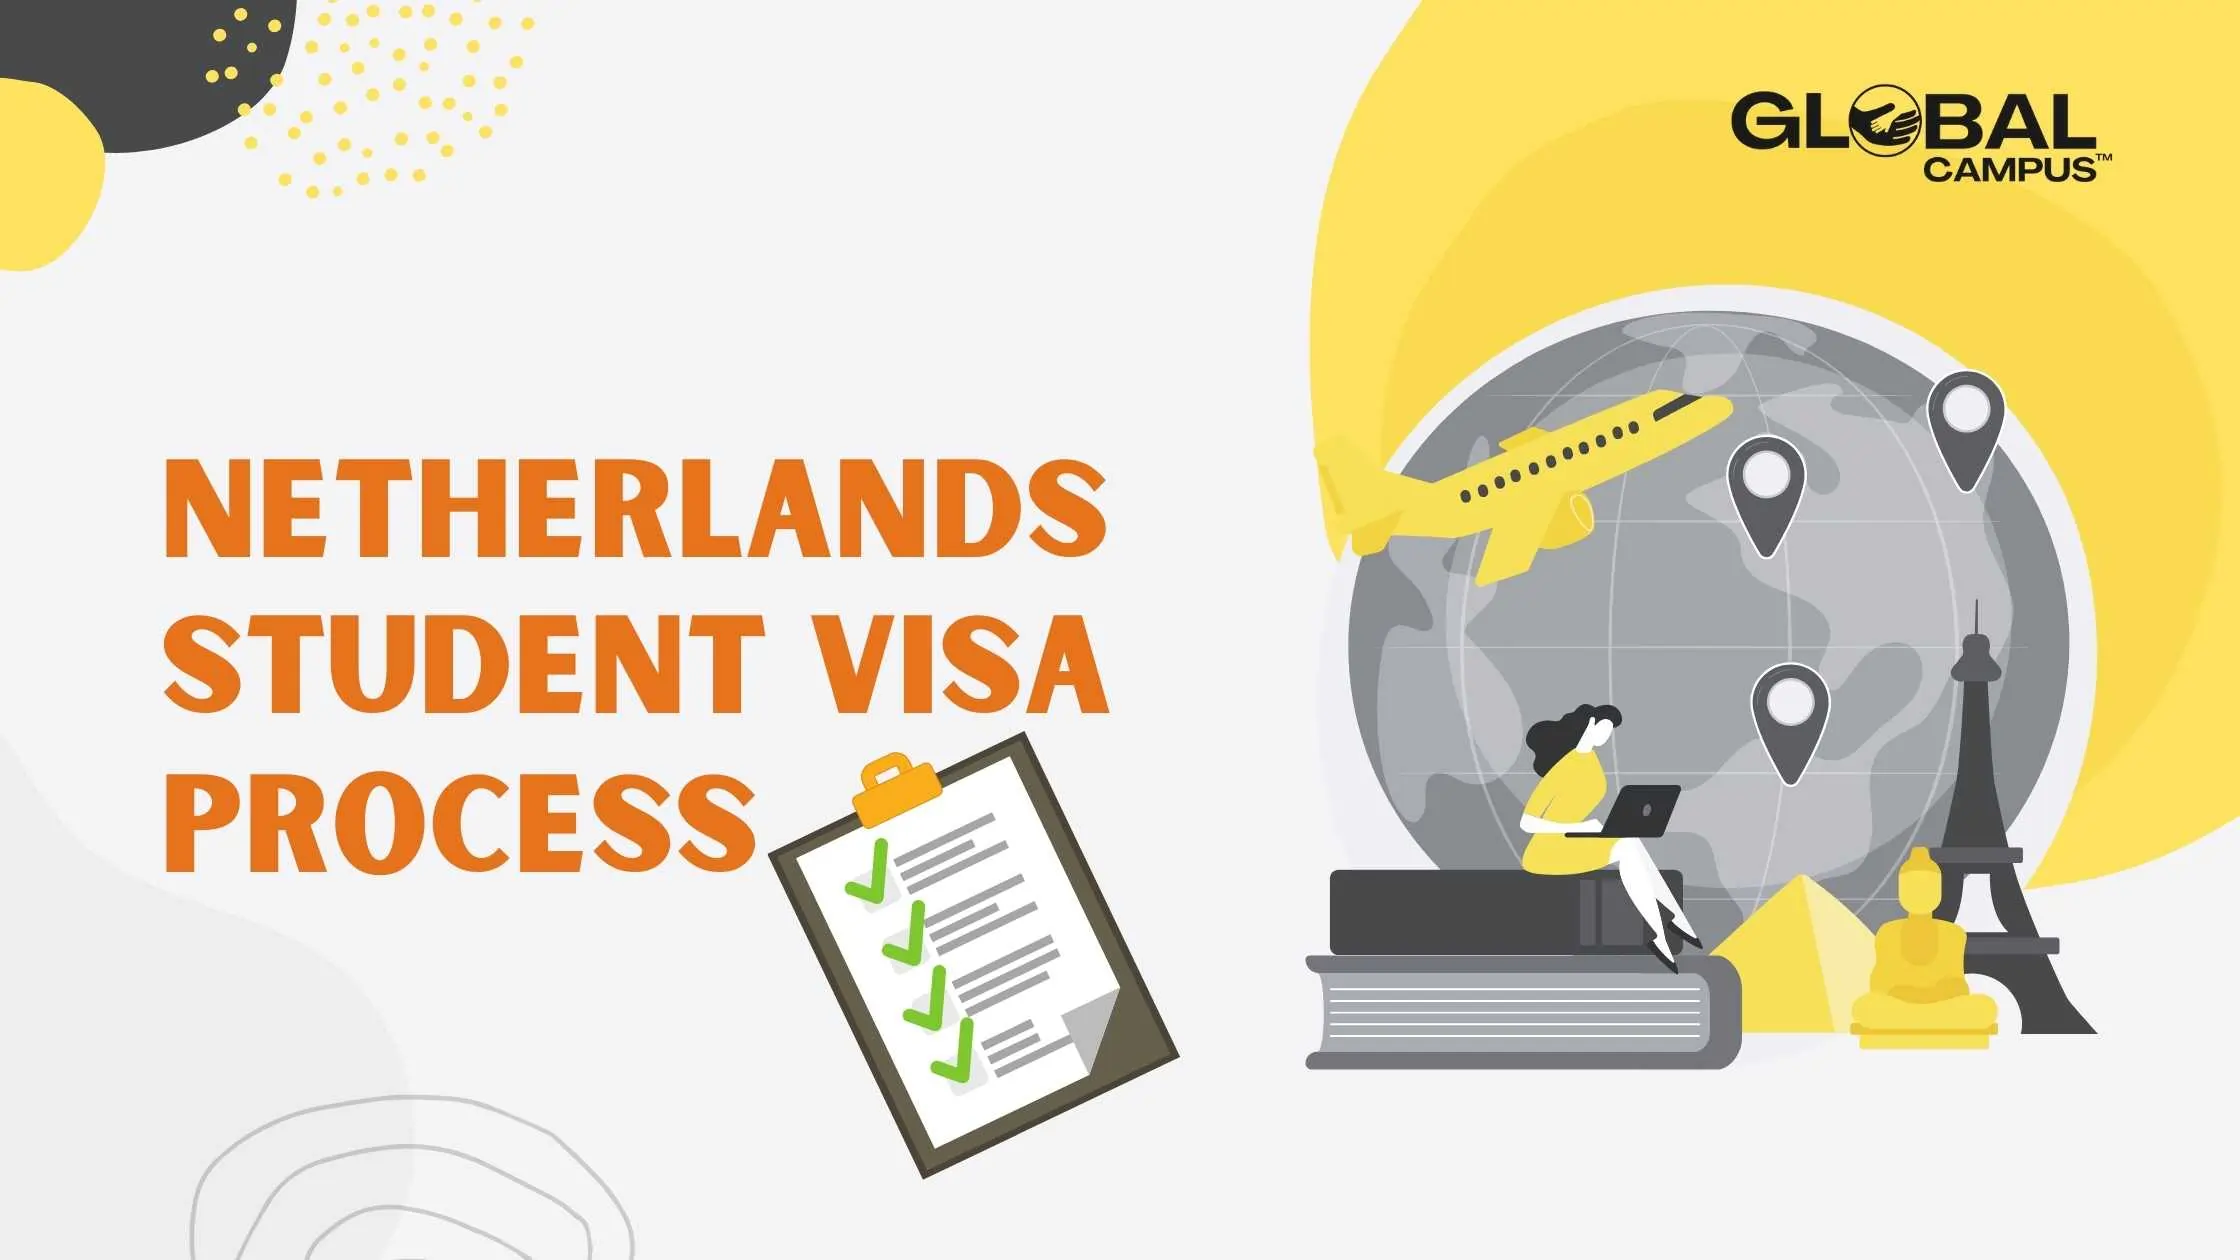 A banner with an image of student & globe mentions the Netherlands Student Visa Process.